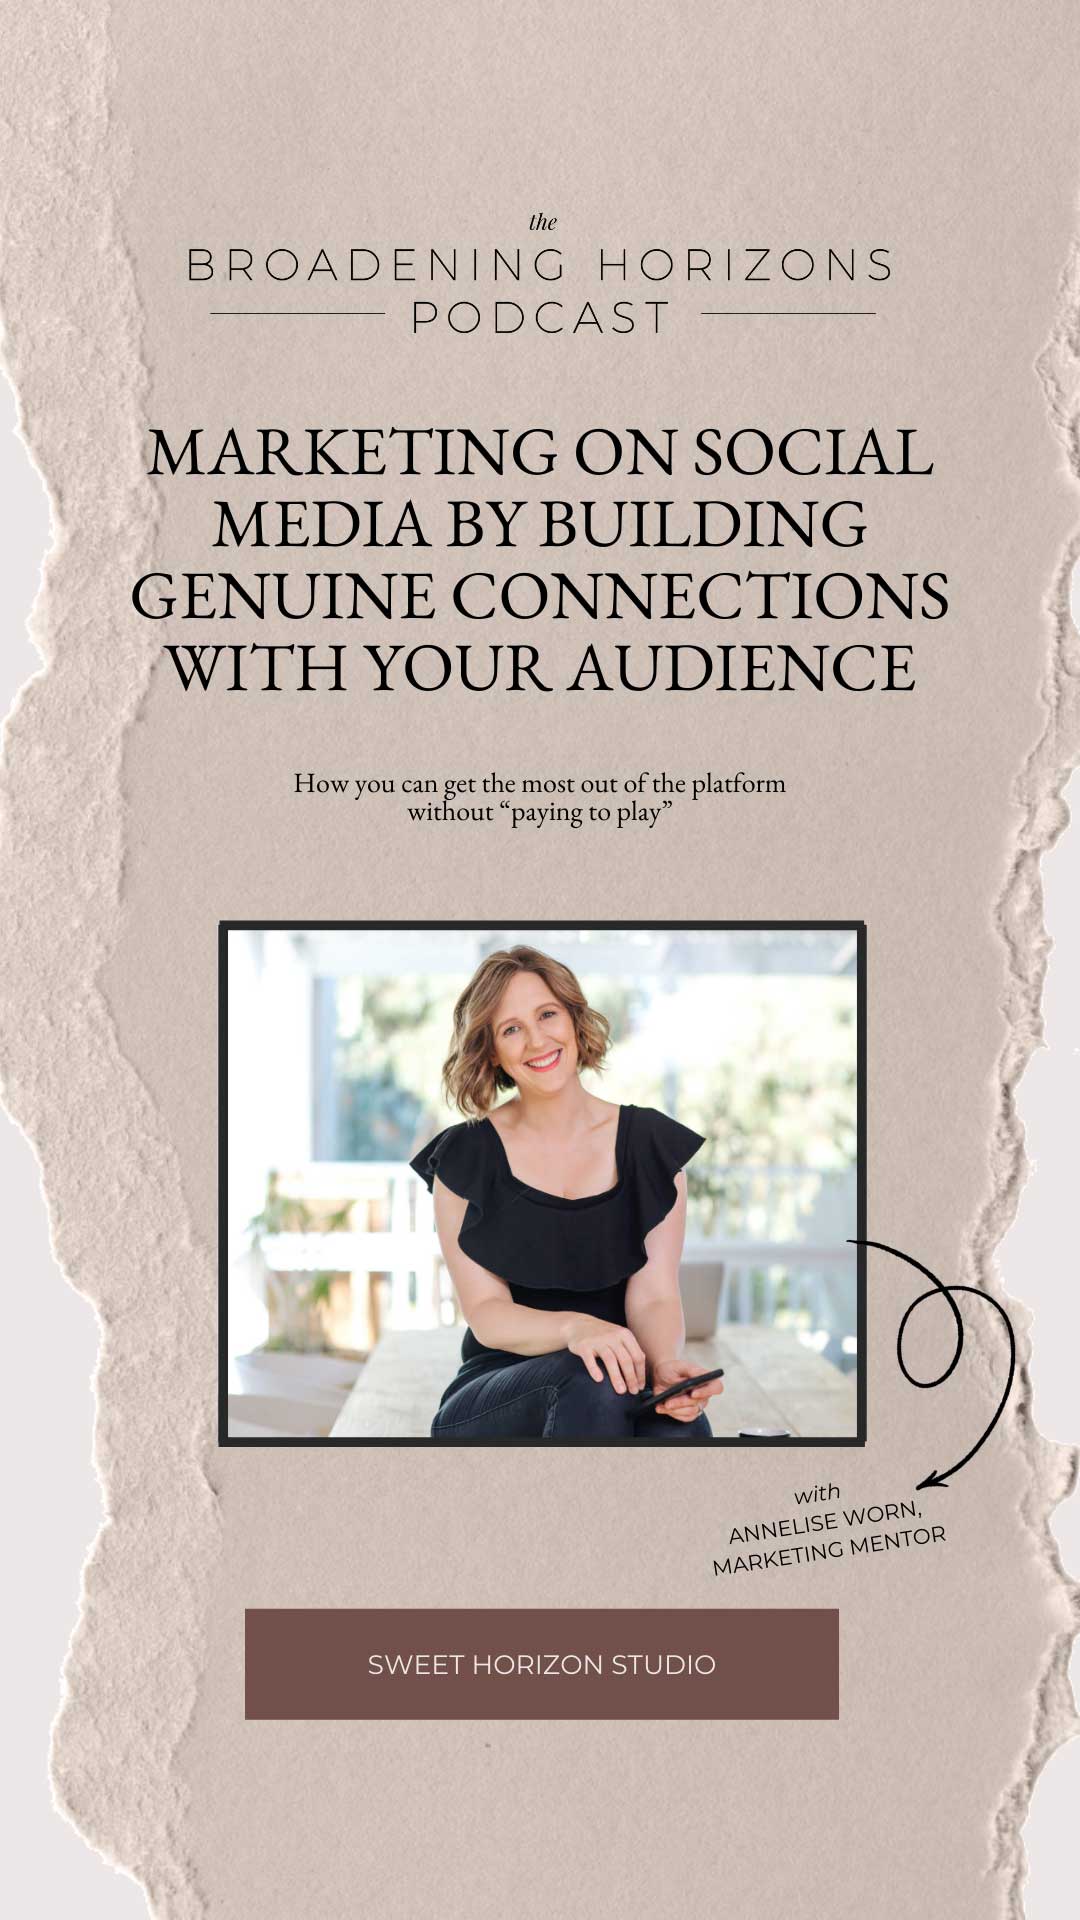 Marketing on Social Media by Building Genuine Connections with Your Audience with Annelise Worn from www.sweethorizonblog.com